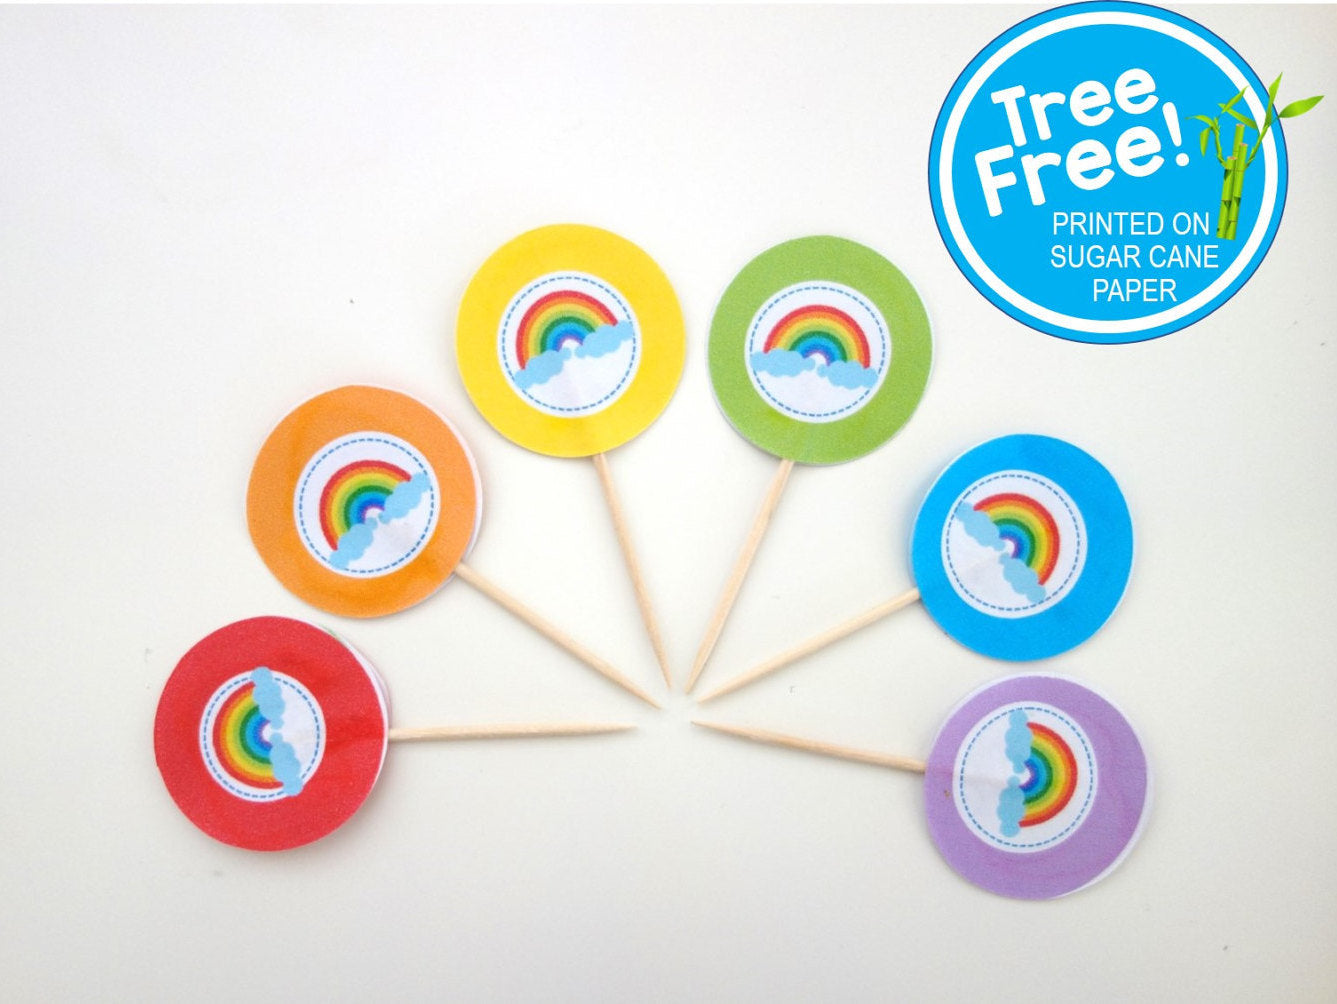 Rainbow Party Picks, 12-pack (Printed on Tree Free Sugar Cane Paper)